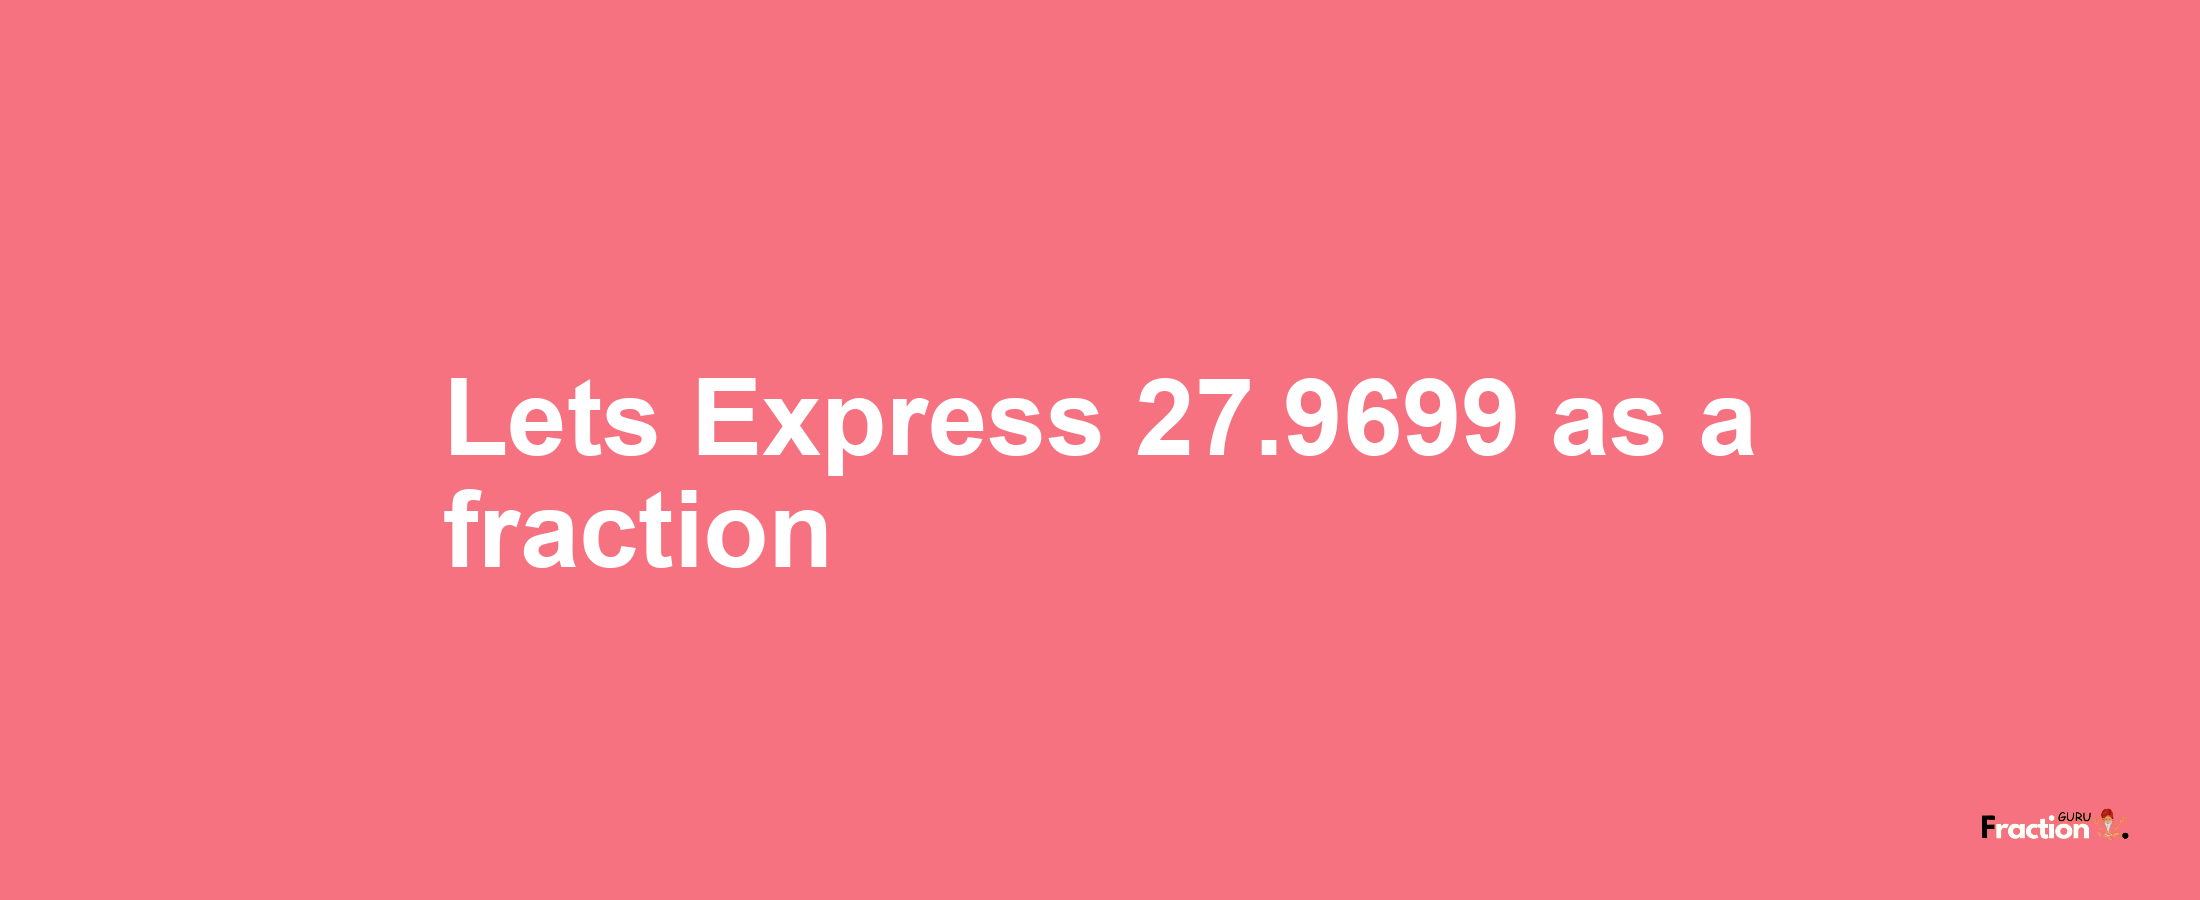 Lets Express 27.9699 as afraction